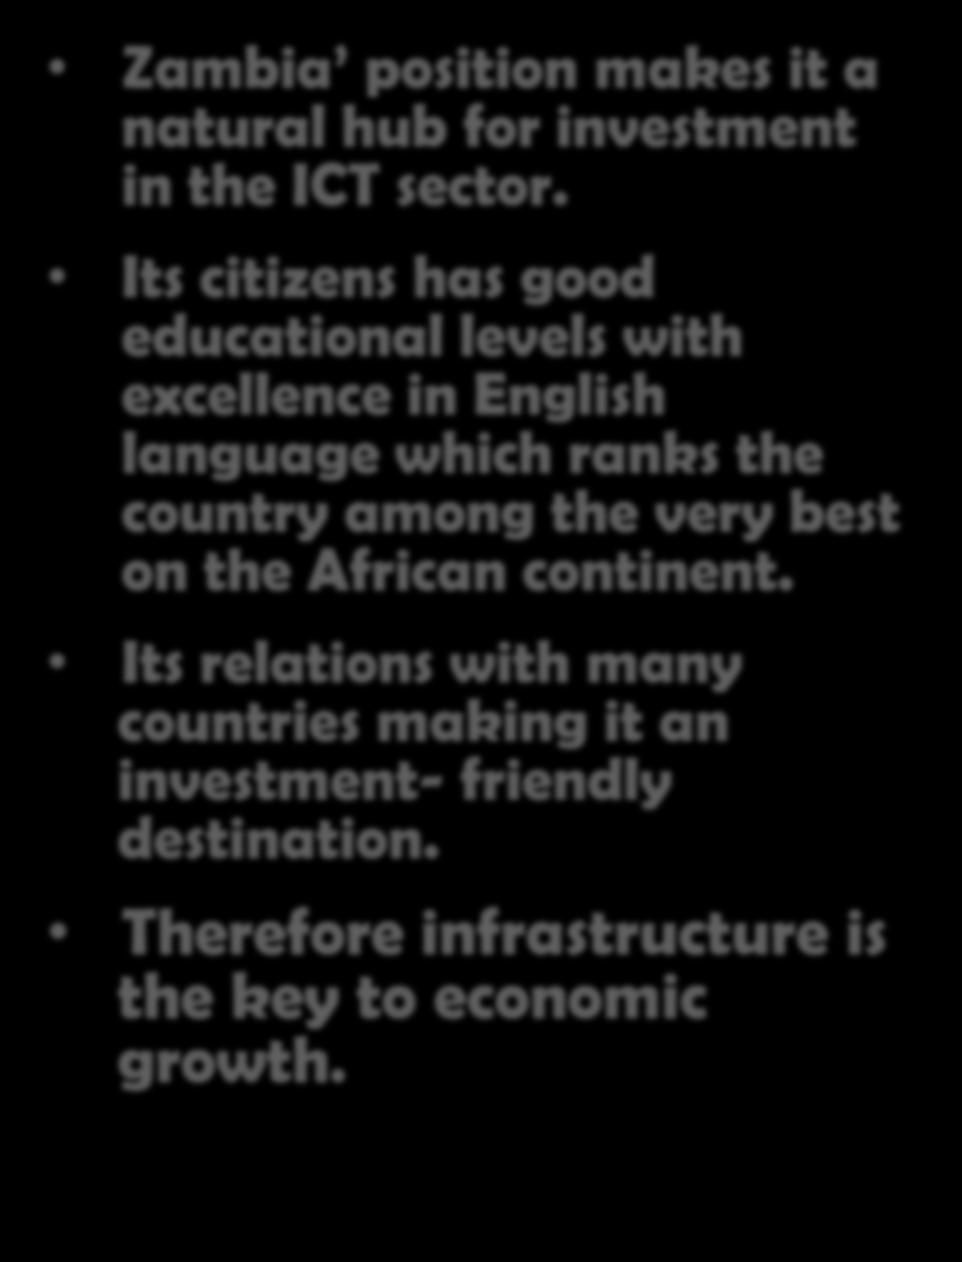 Zambia s Strategic Geographical Position Zambia position makes it a natural hub for investment in the ICT sector.